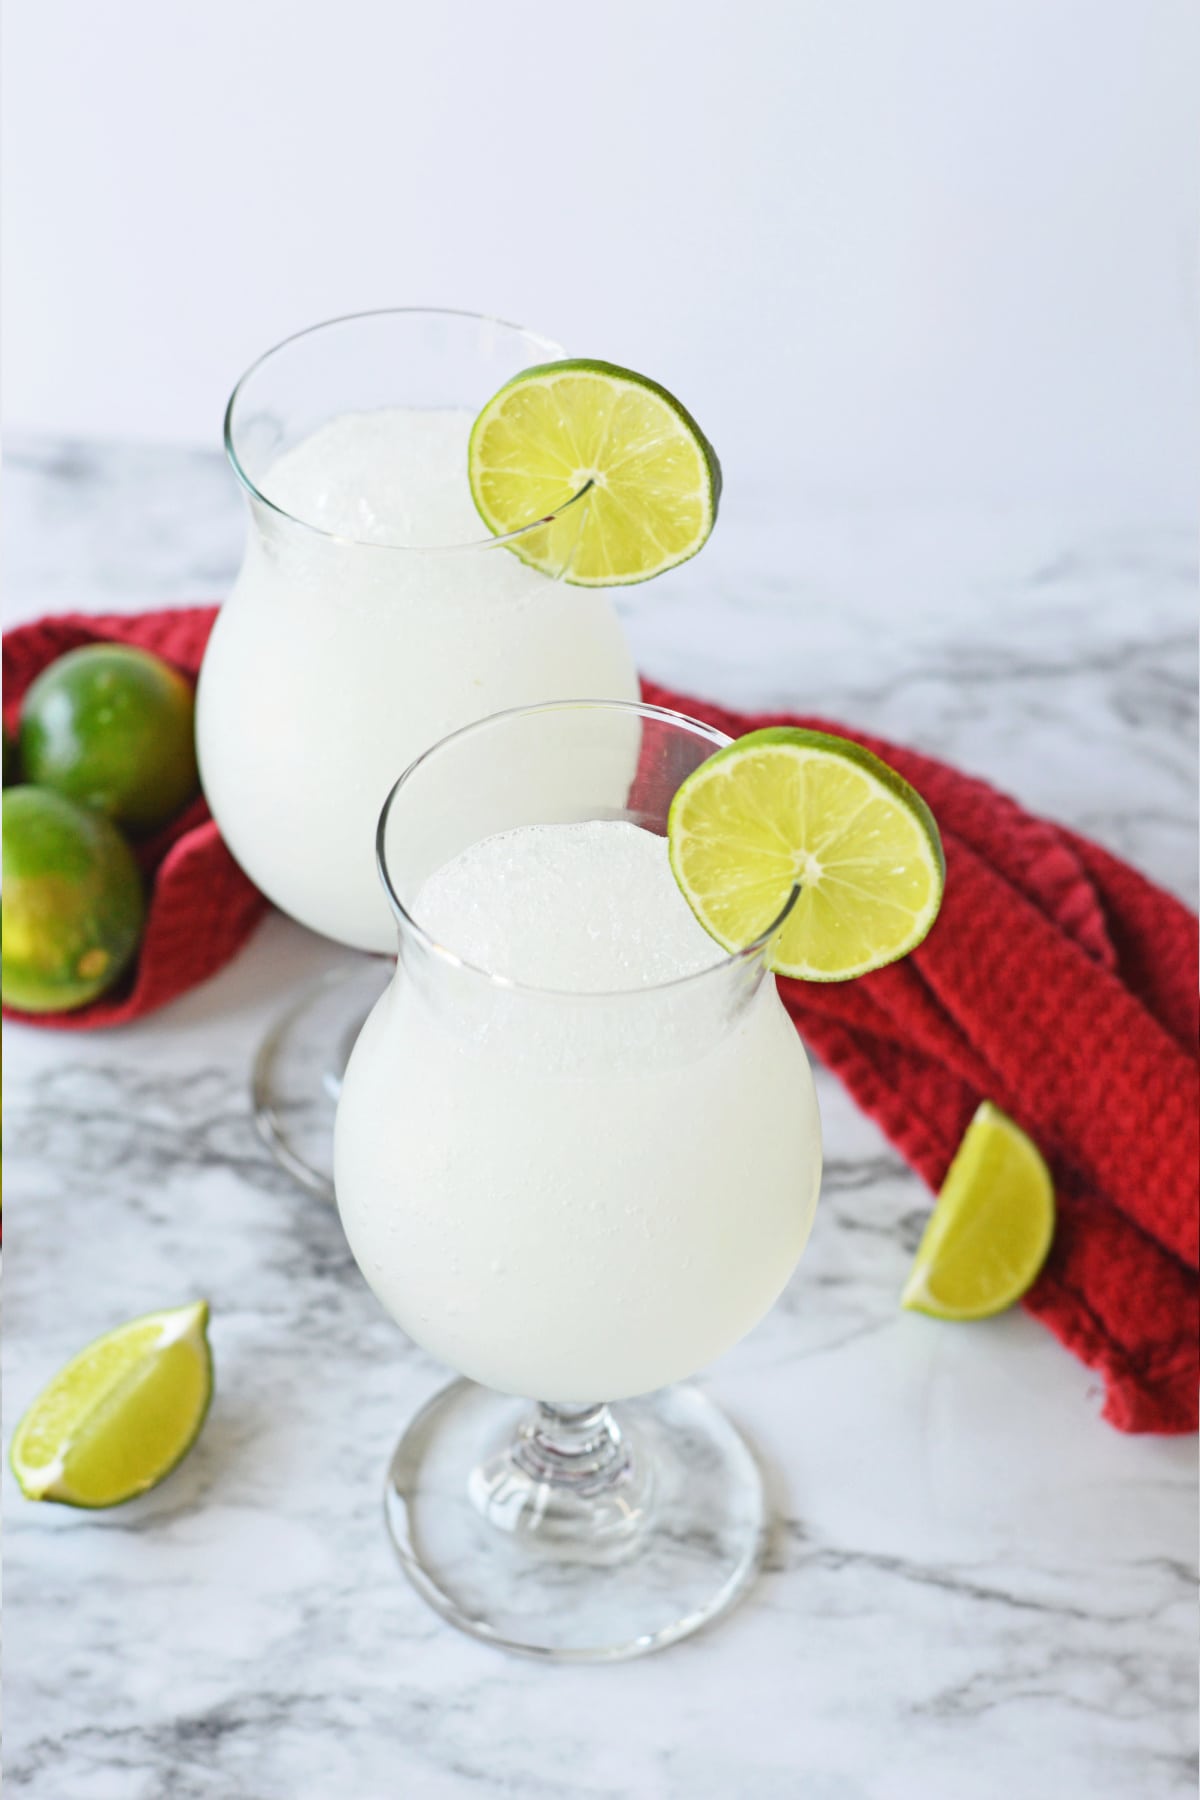 Two frozen daiquiris with red towel and limes